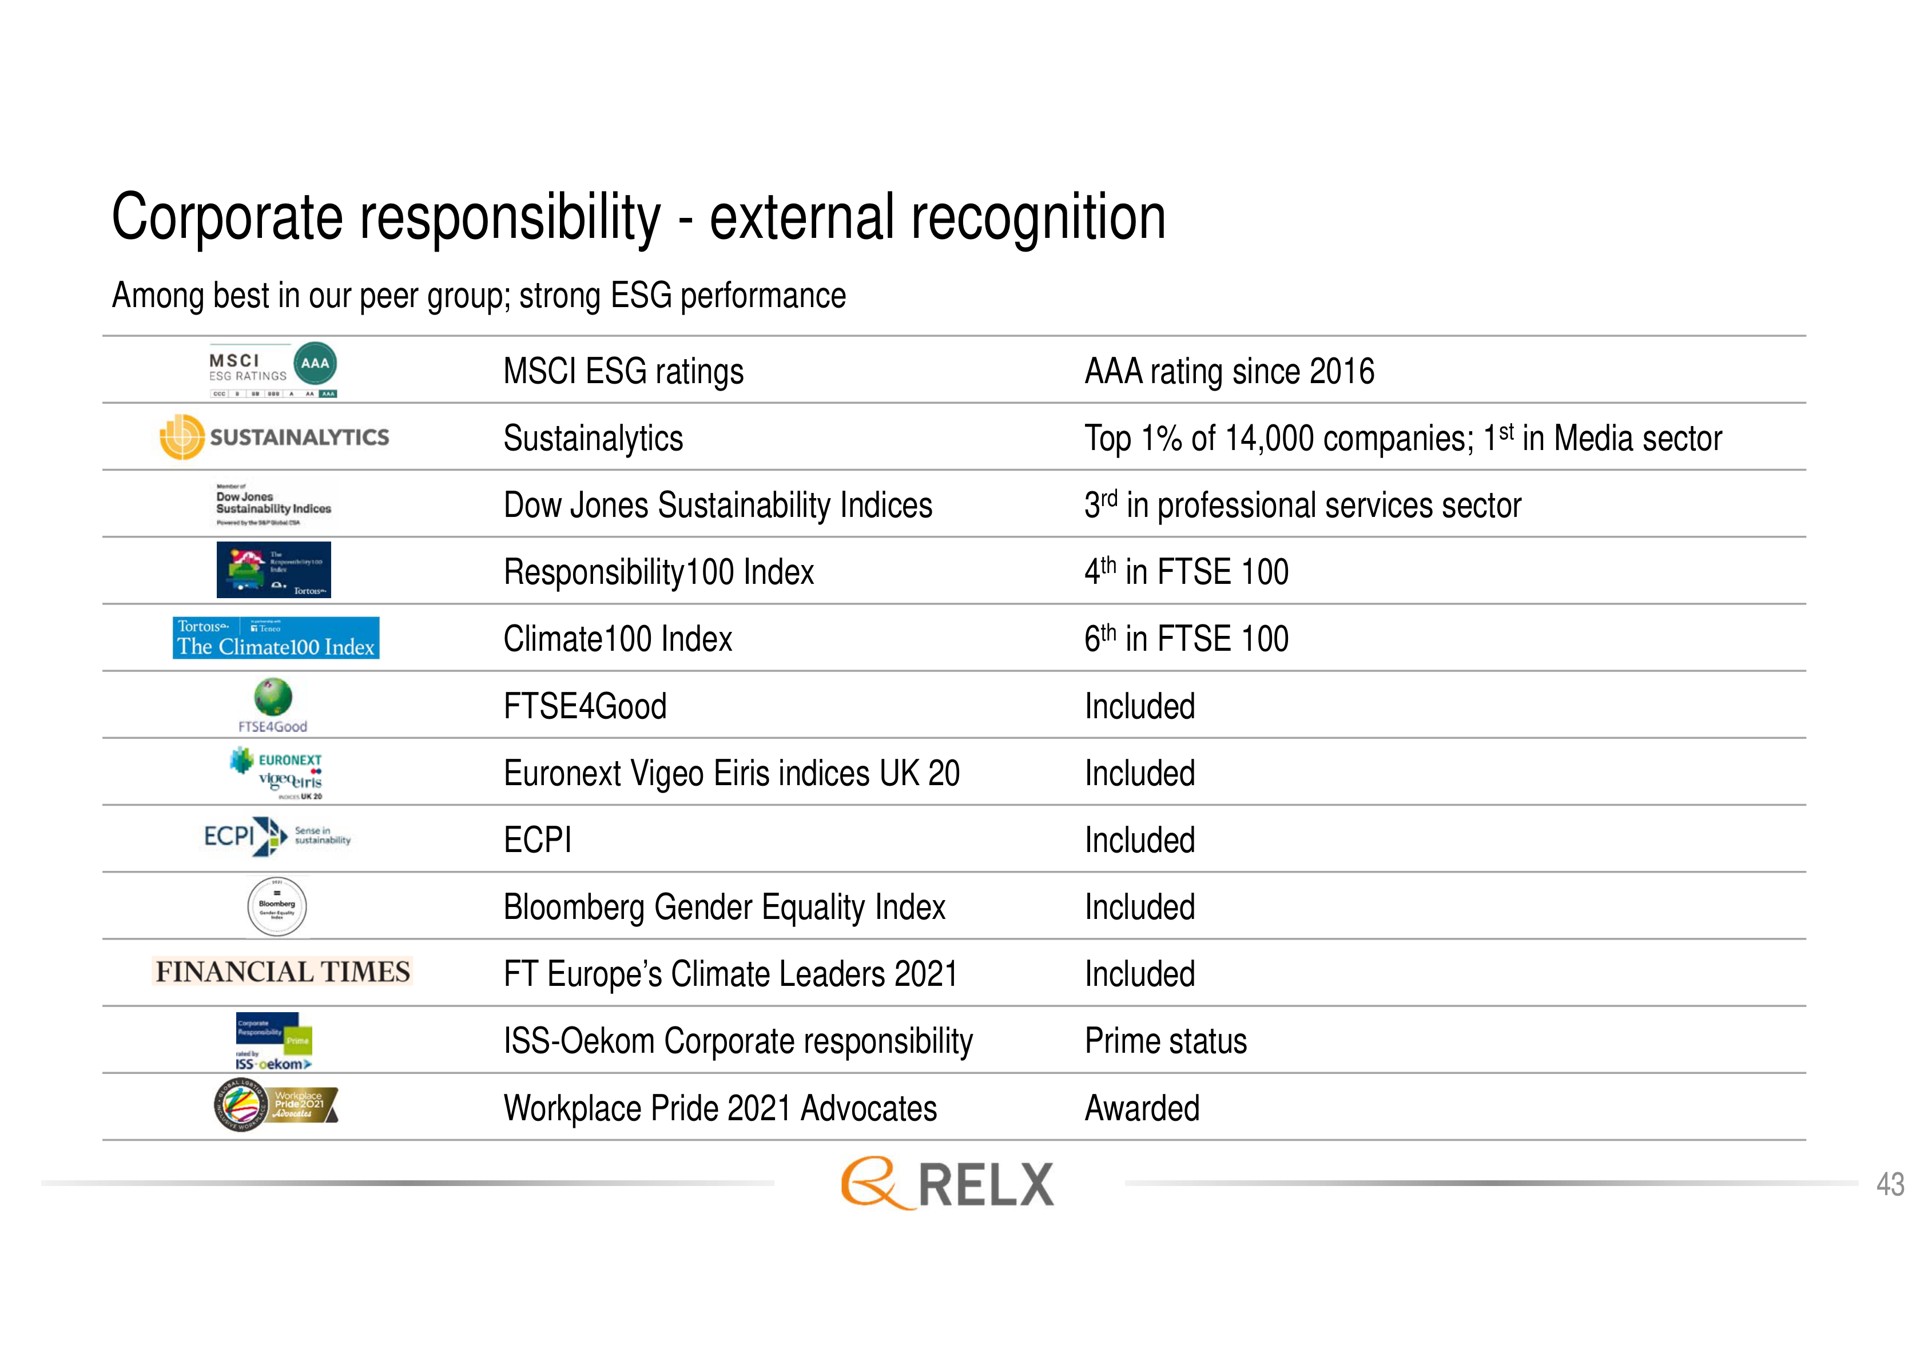 corporate responsibility external recognition | RELX